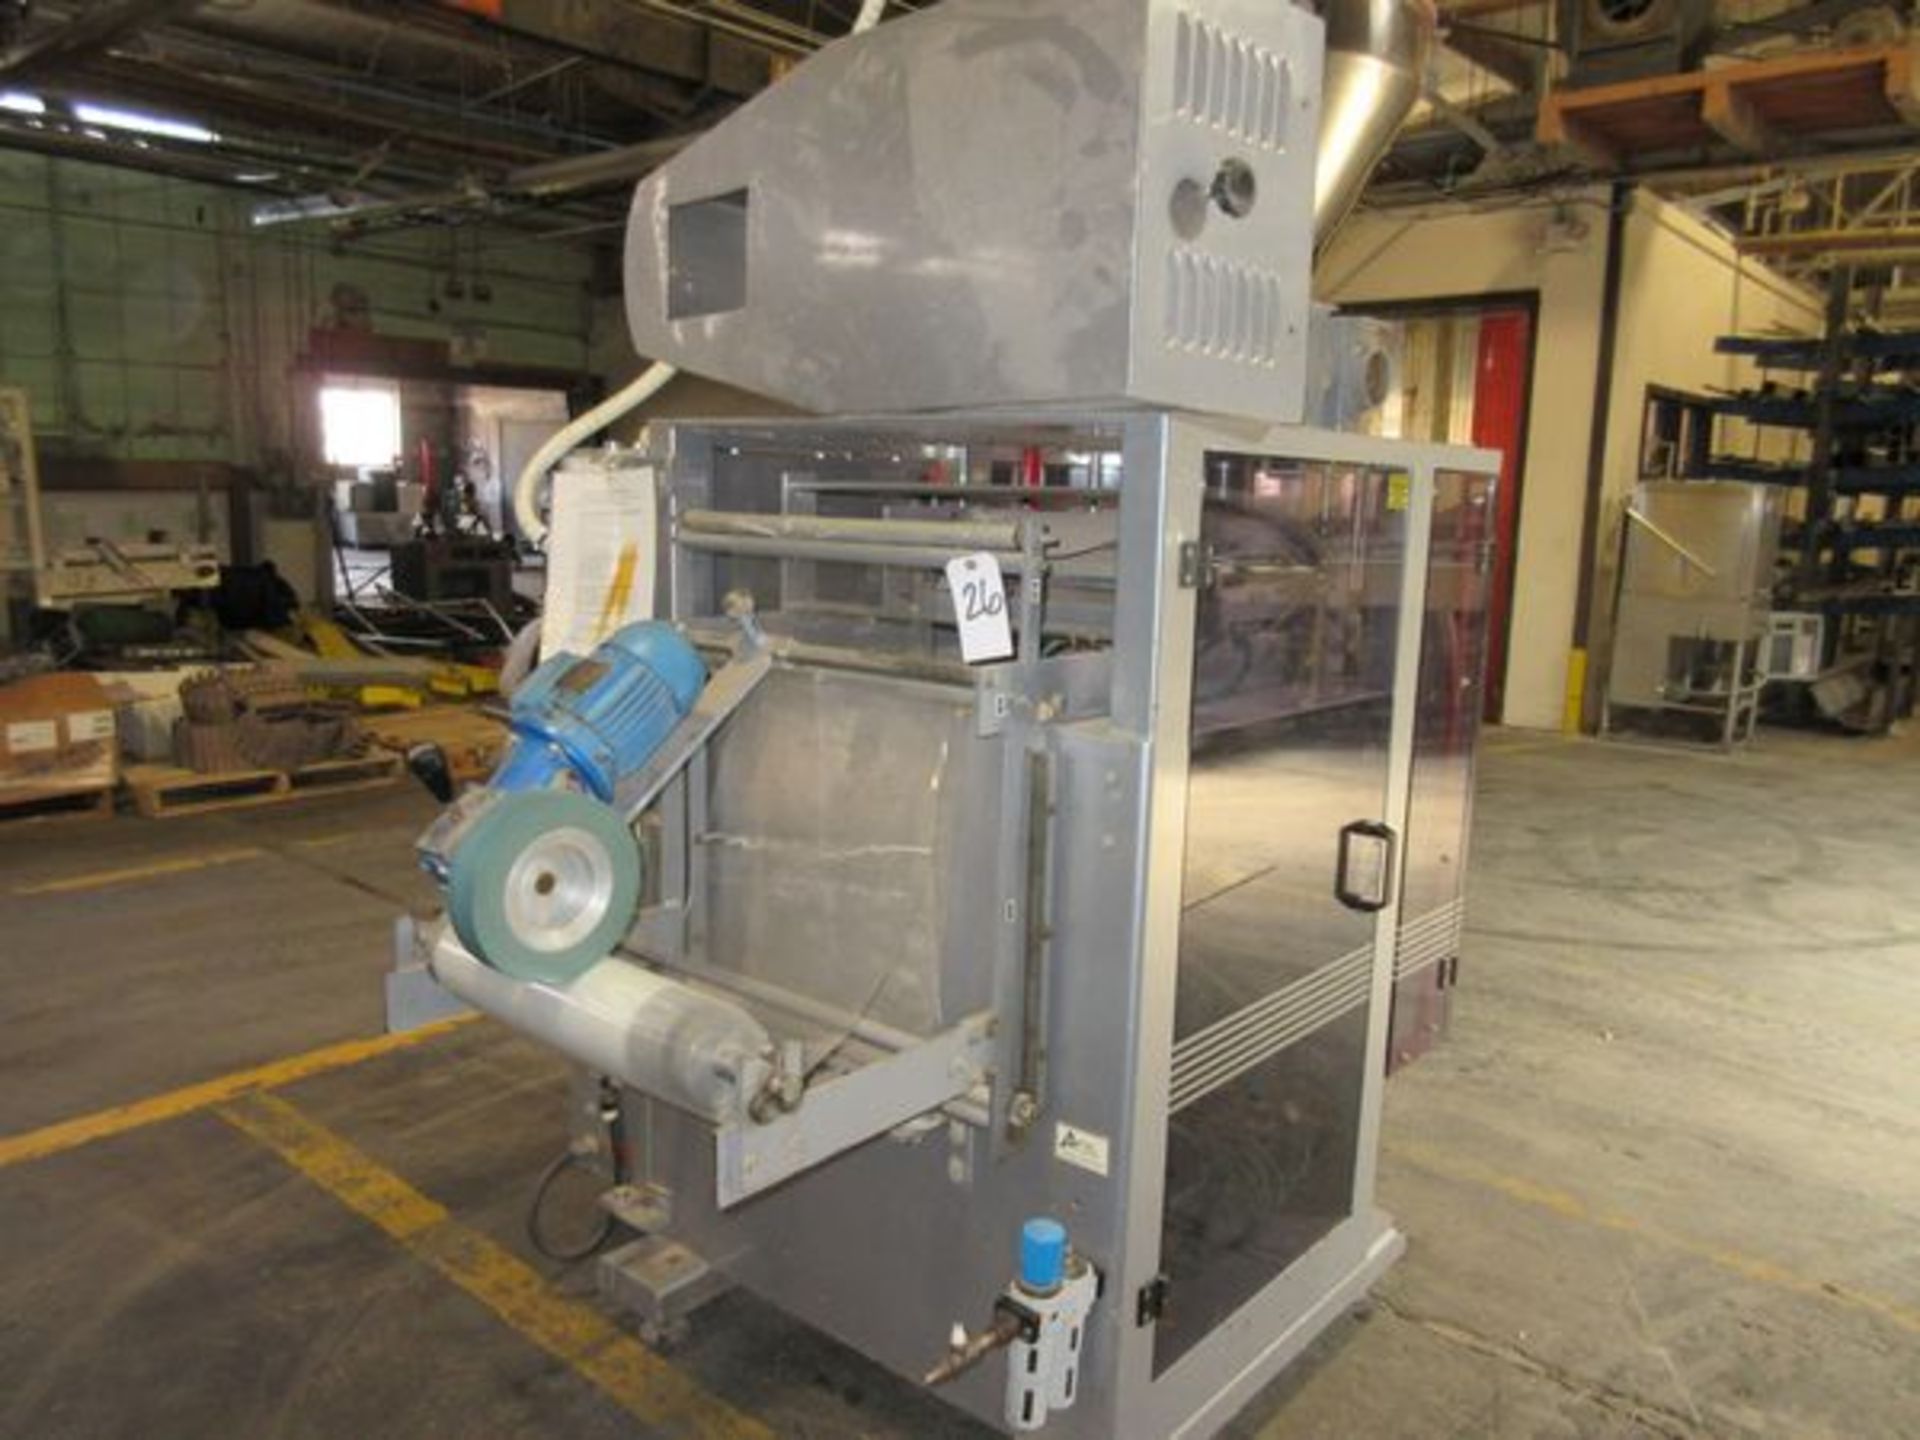 Avatar Taylor V2100 Vertical Form Fill and Seal with Powder Auger Filler 25 to 28 BP | Rig Fee $200 - Image 7 of 10